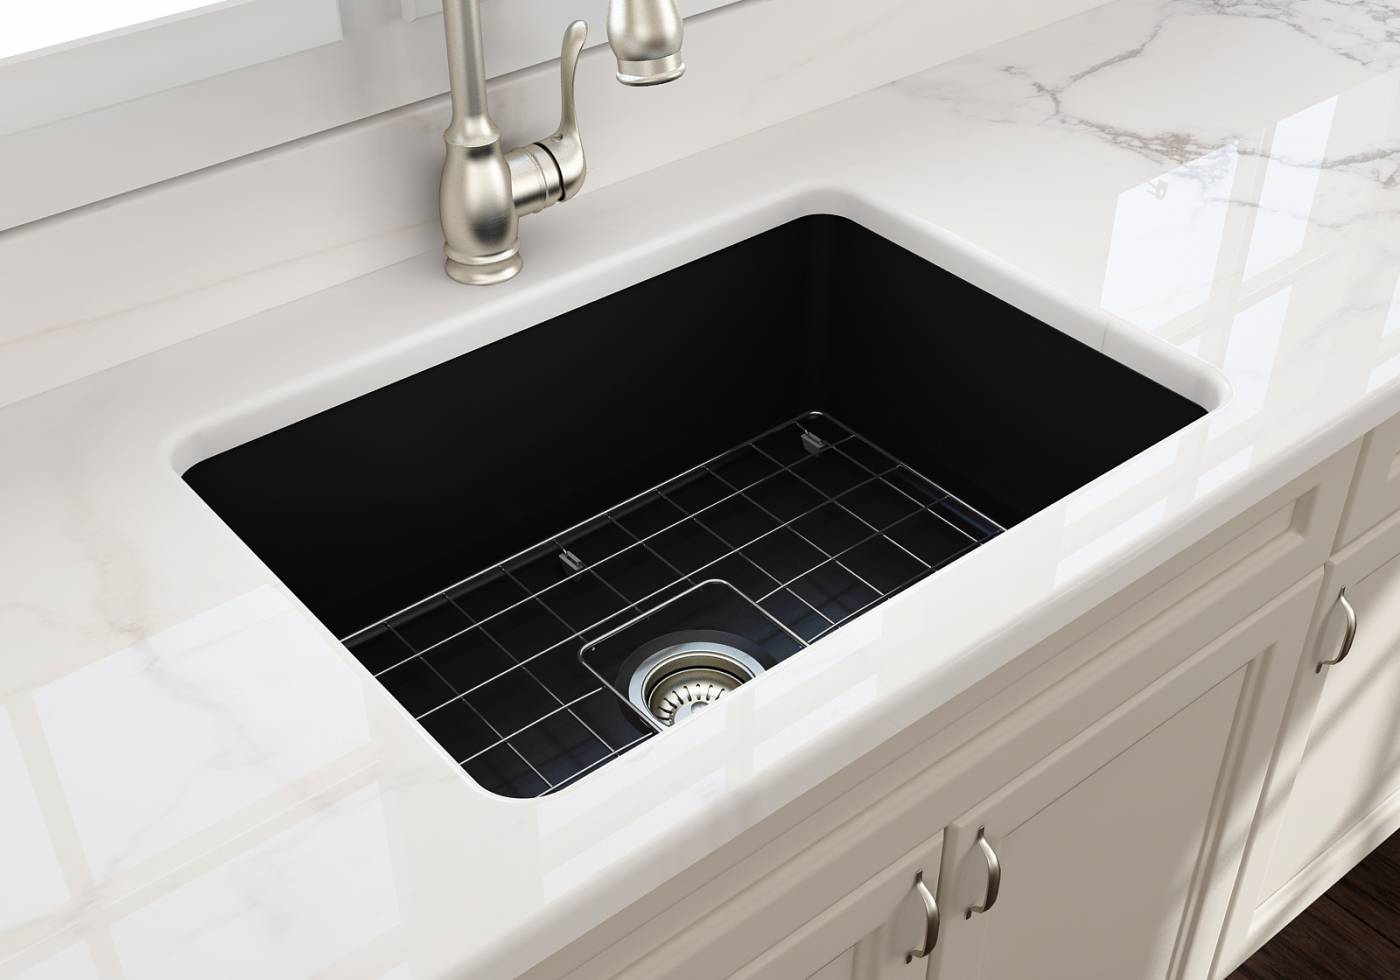 An underbench mounted black butlers sink